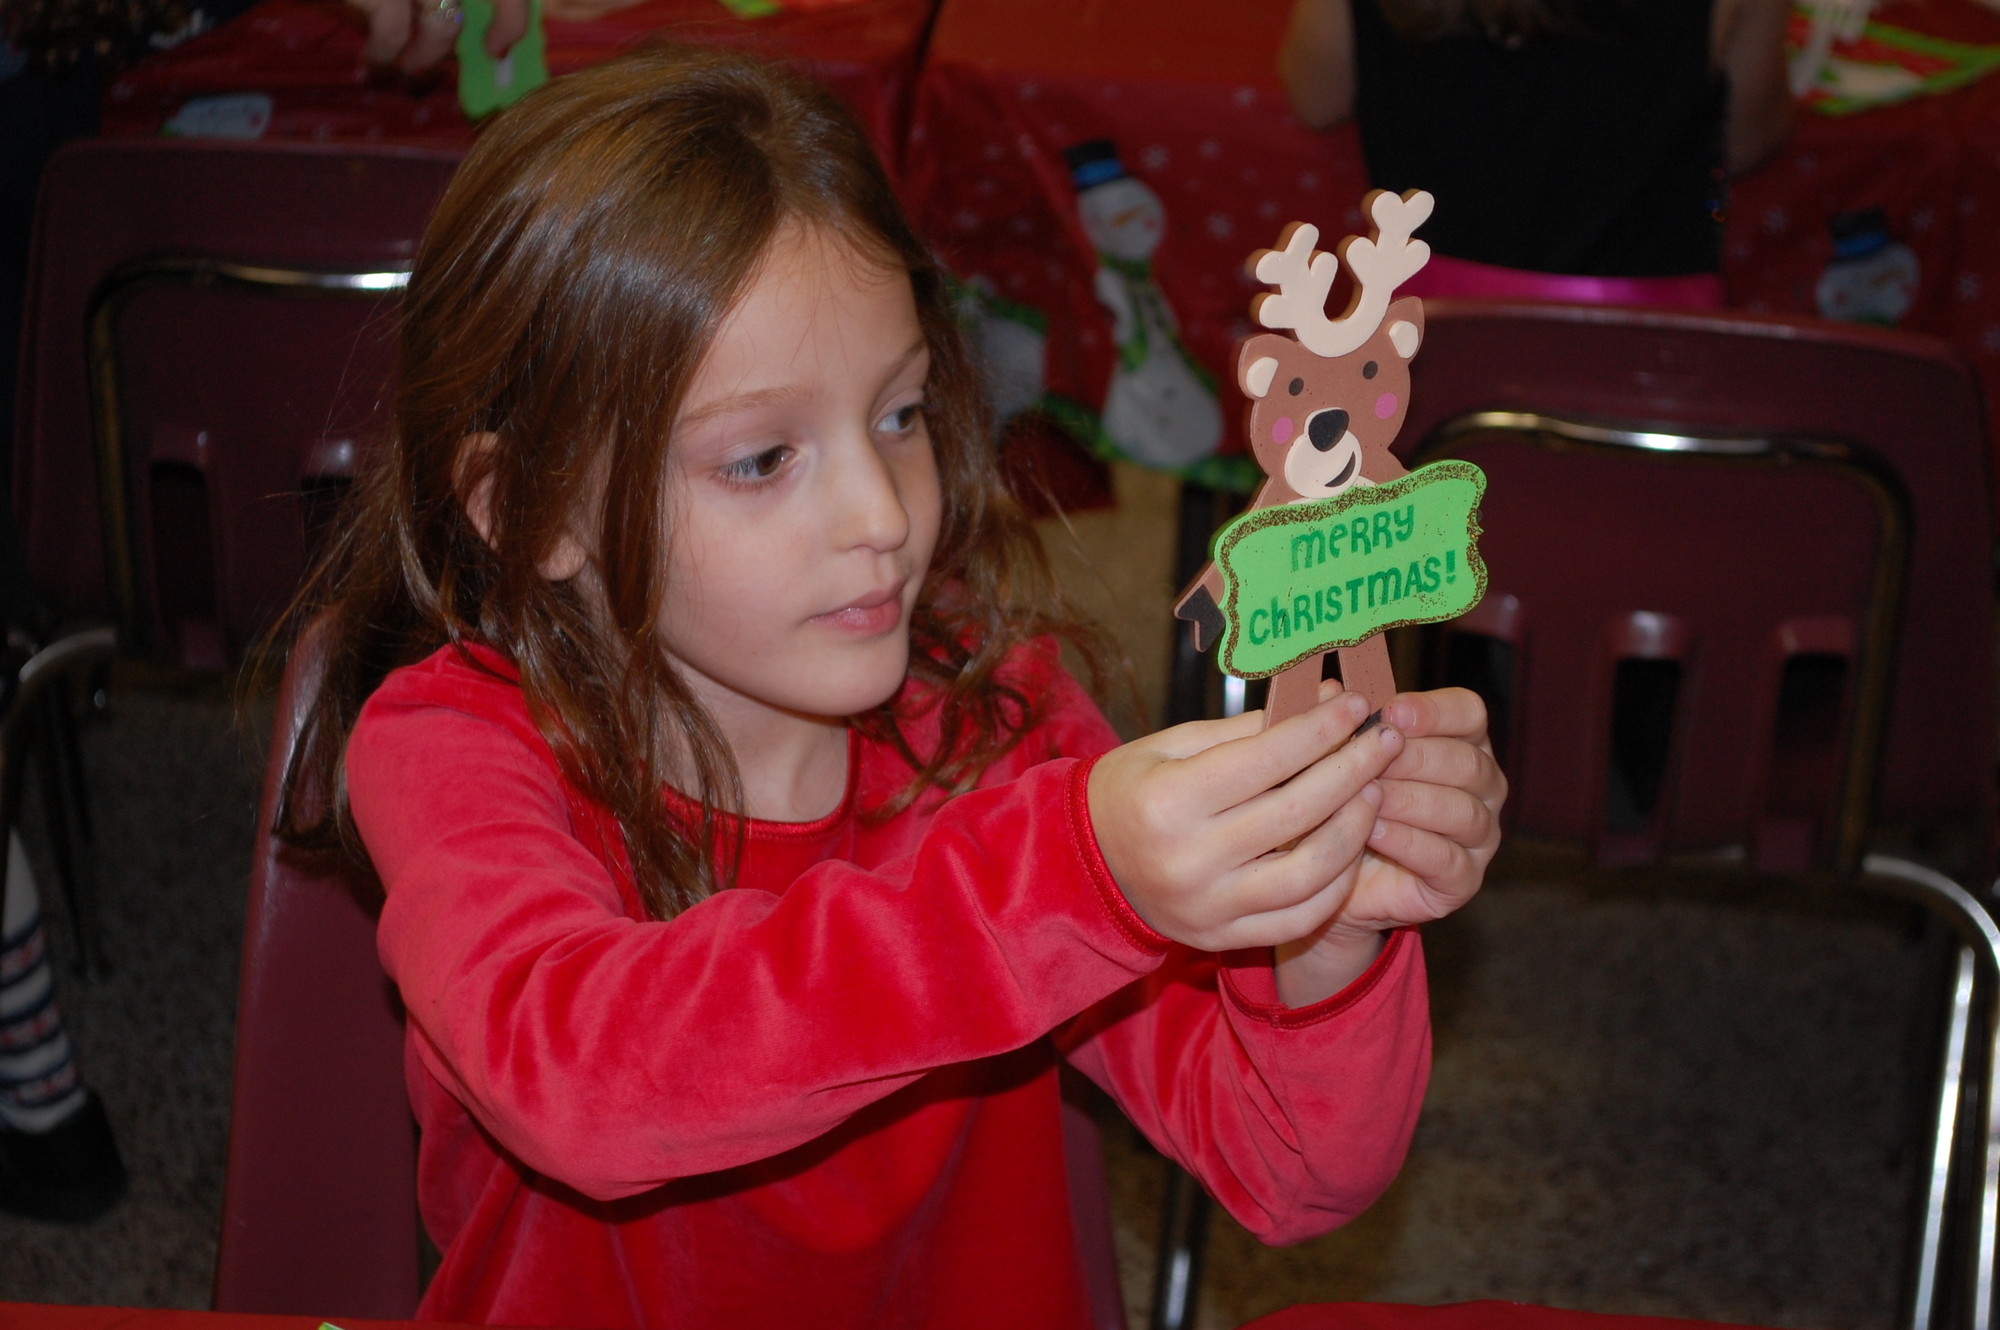 First-grader Shannon Watt proudly showed off the reindeer ornament that she made to take home for her Christmas tree.